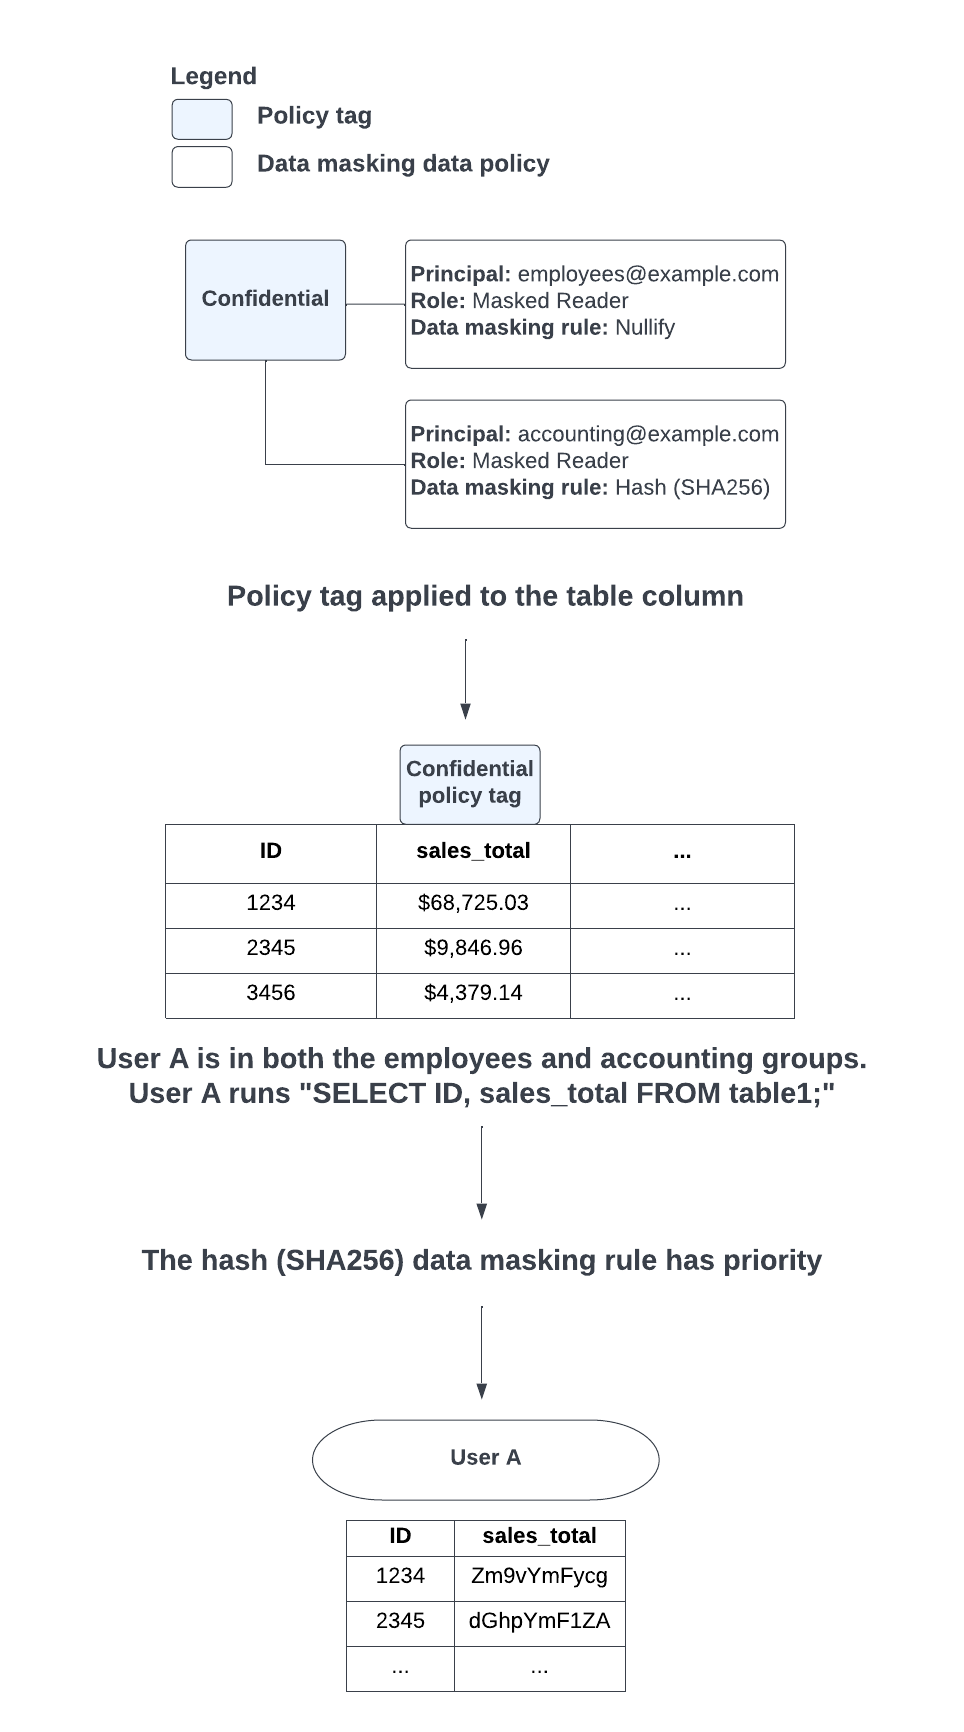 When there is a conflict between applying the nullify and the hash (SHA-256)
data masking rules due to the groups a user is in, the hash (SHA-256) data
masking rule is
prioritized.